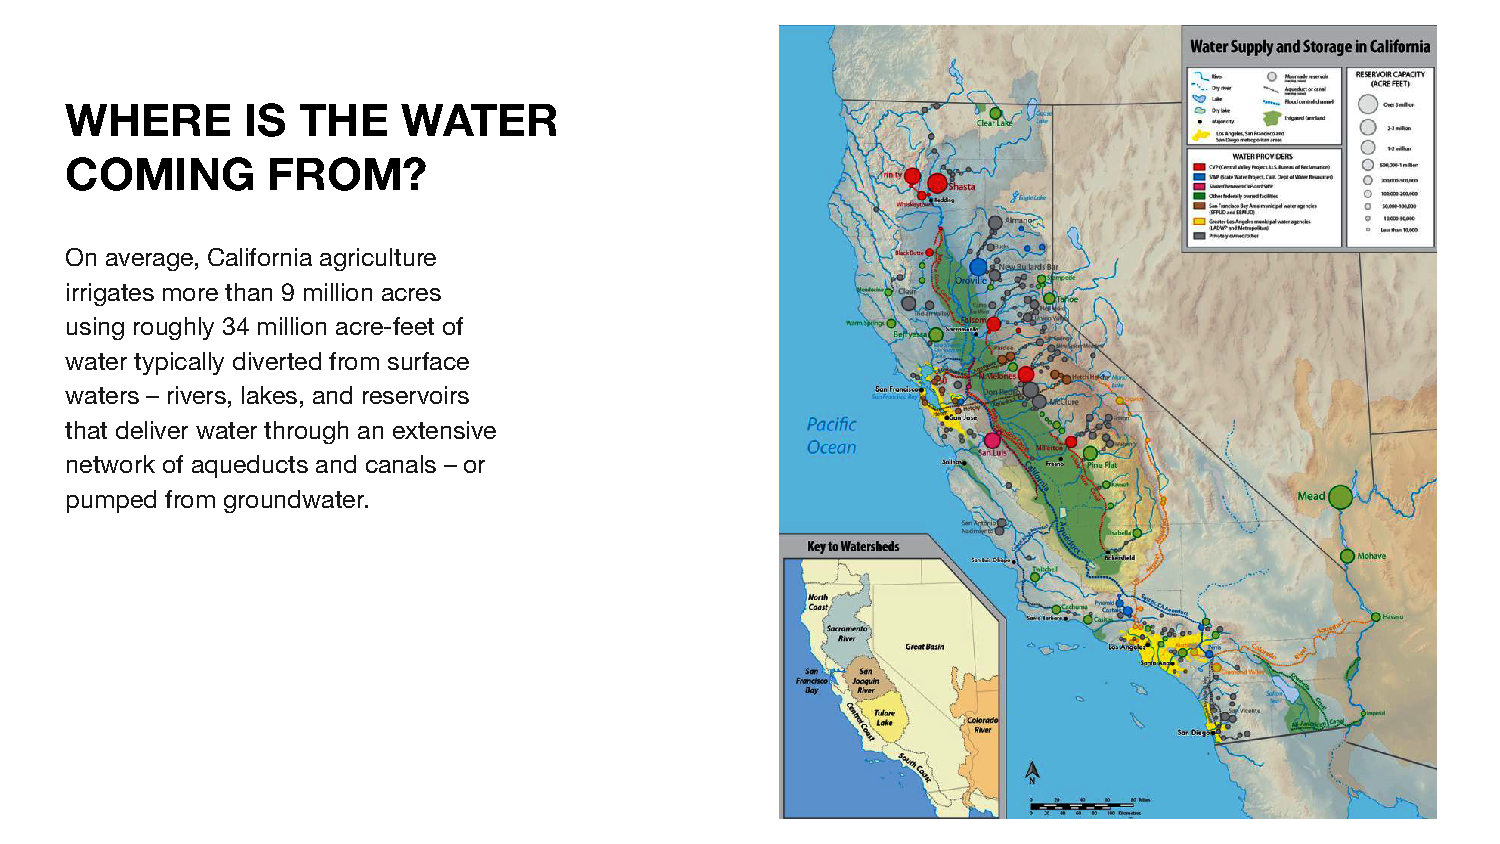 Informational Slide talking about how California acquires water accompanied by a map outlining the water bodies and reservoirs in that region.